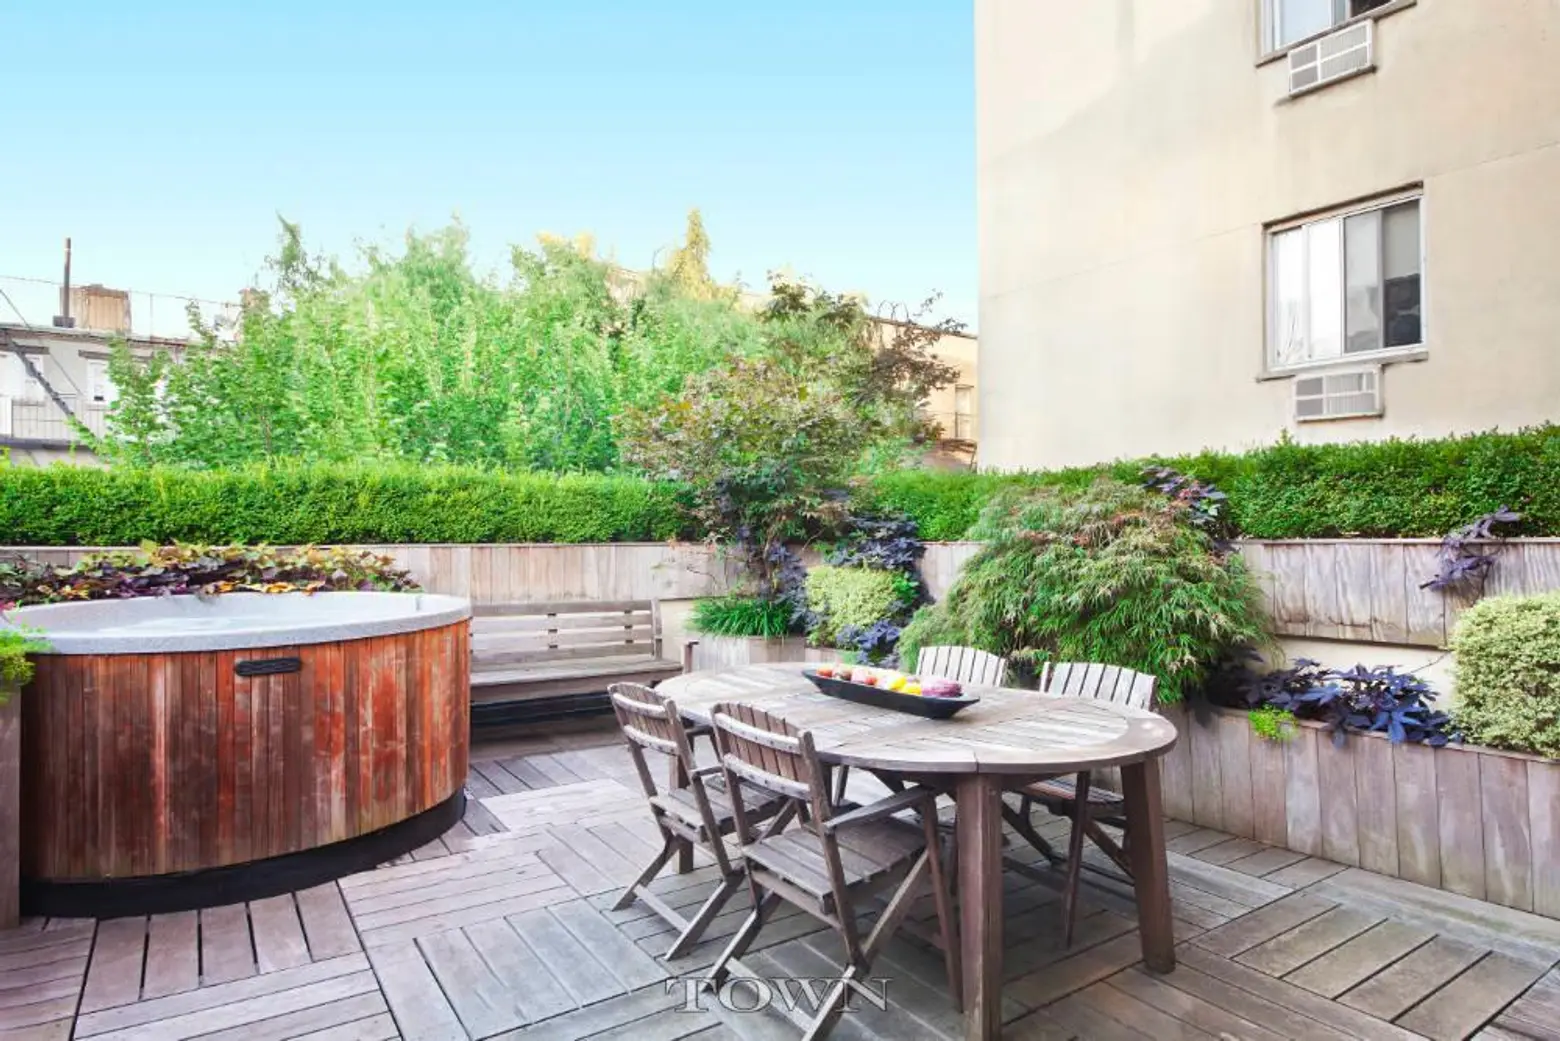 317 east 8th street, patio, terrace, outdoors